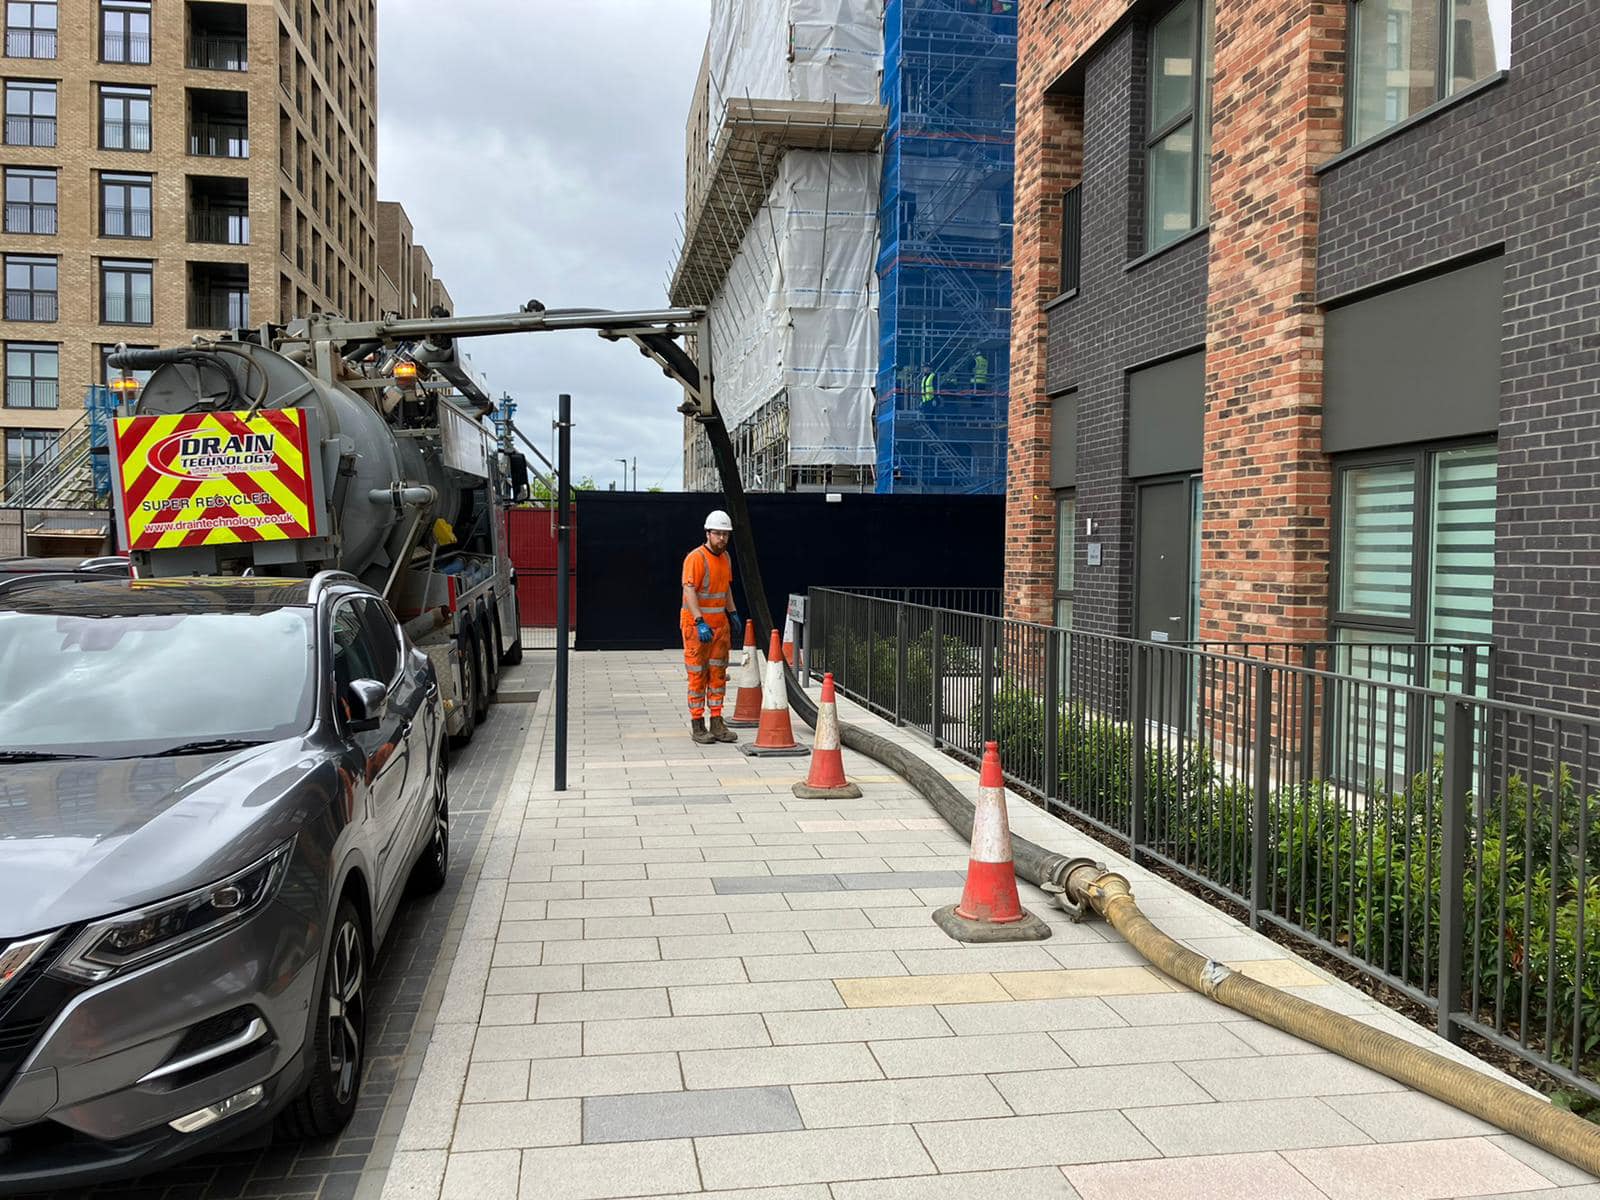 Todays task for one of our tanker teams was a 135m pull from a basement through an inaccessible manhole to a tank down in London.